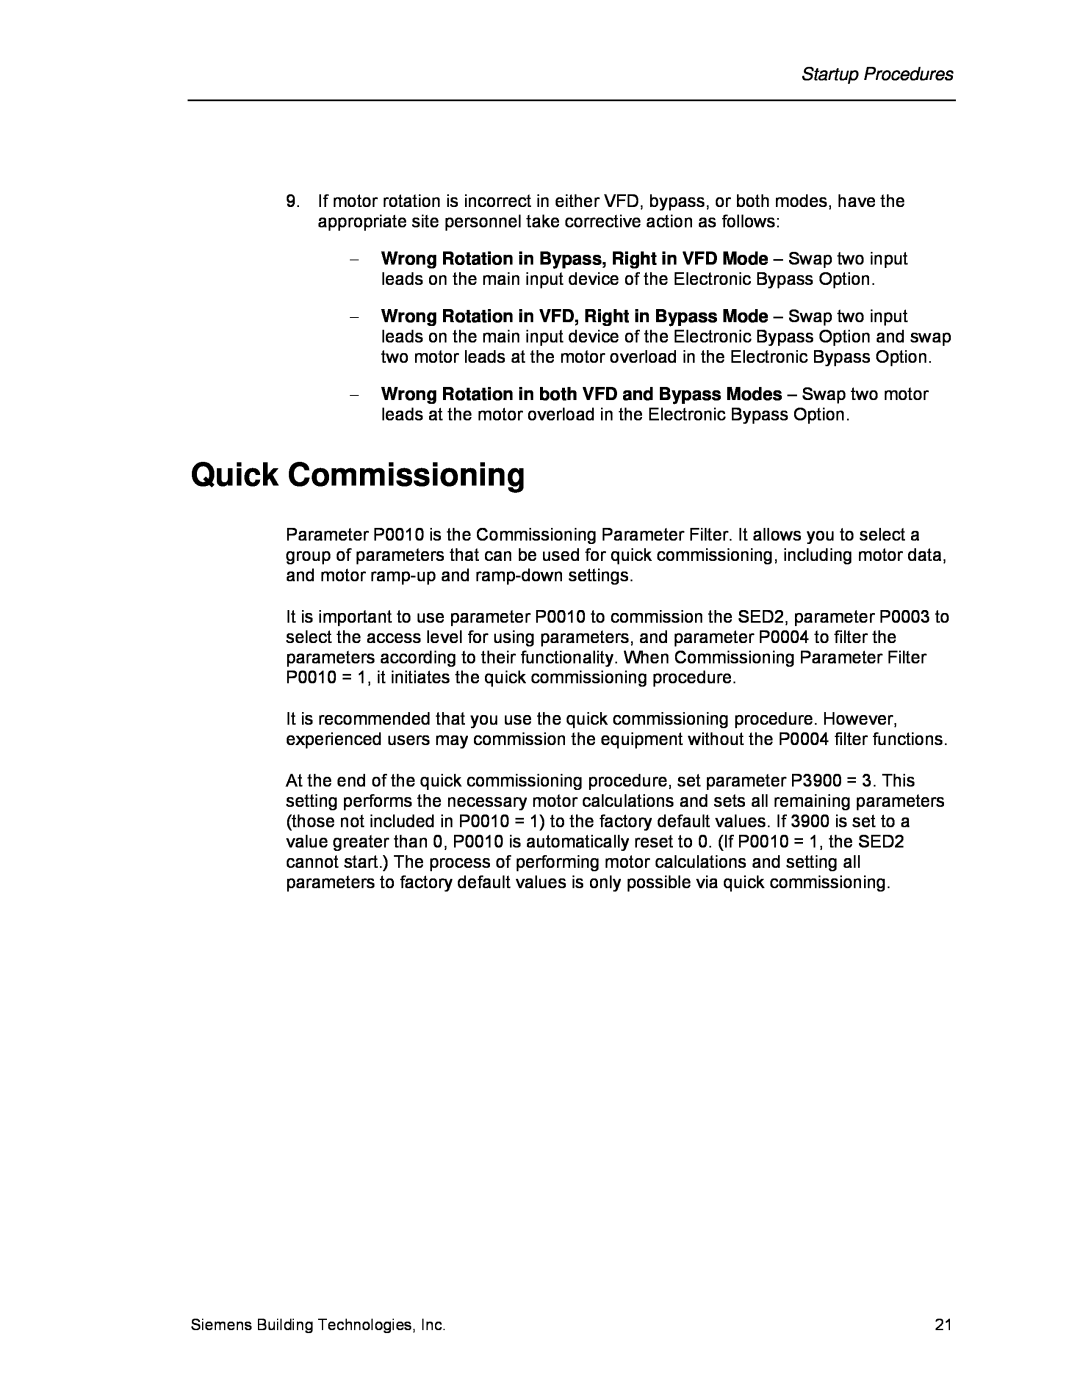 Siemens 125-3208 operating instructions Quick Commissioning, Siemens Building Technologies, Inc 